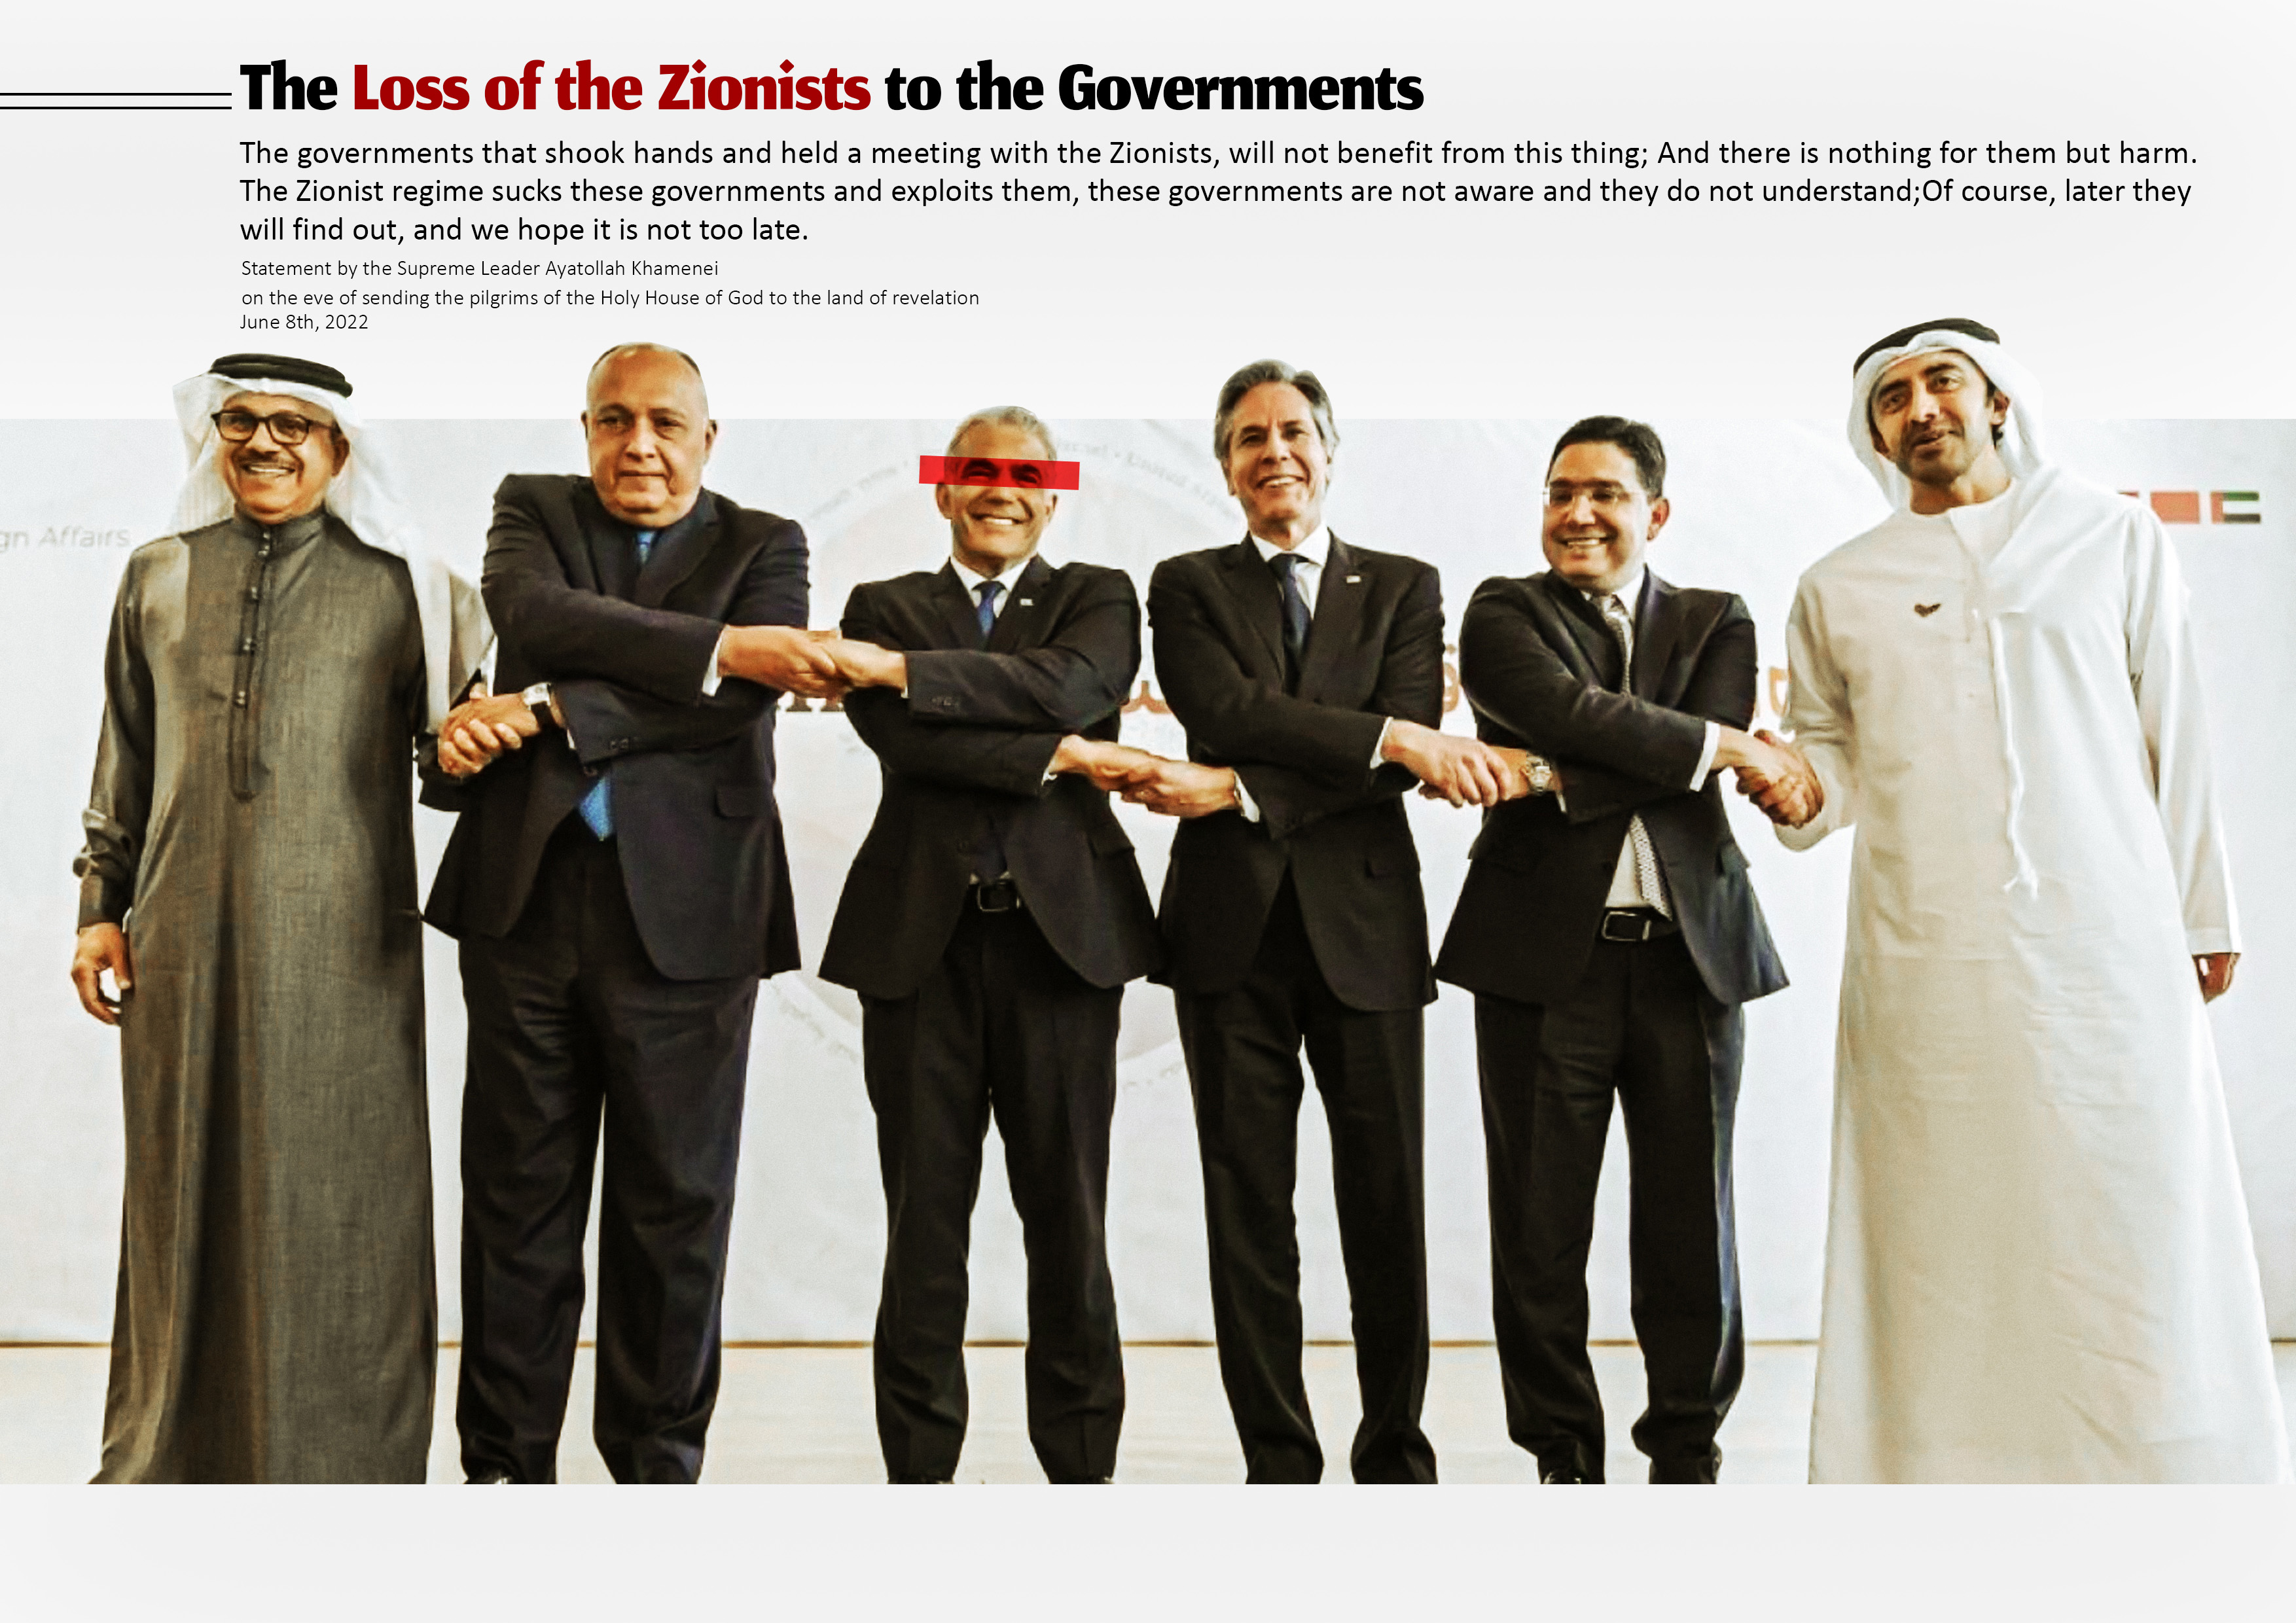 the loss of the Zionists to the governments